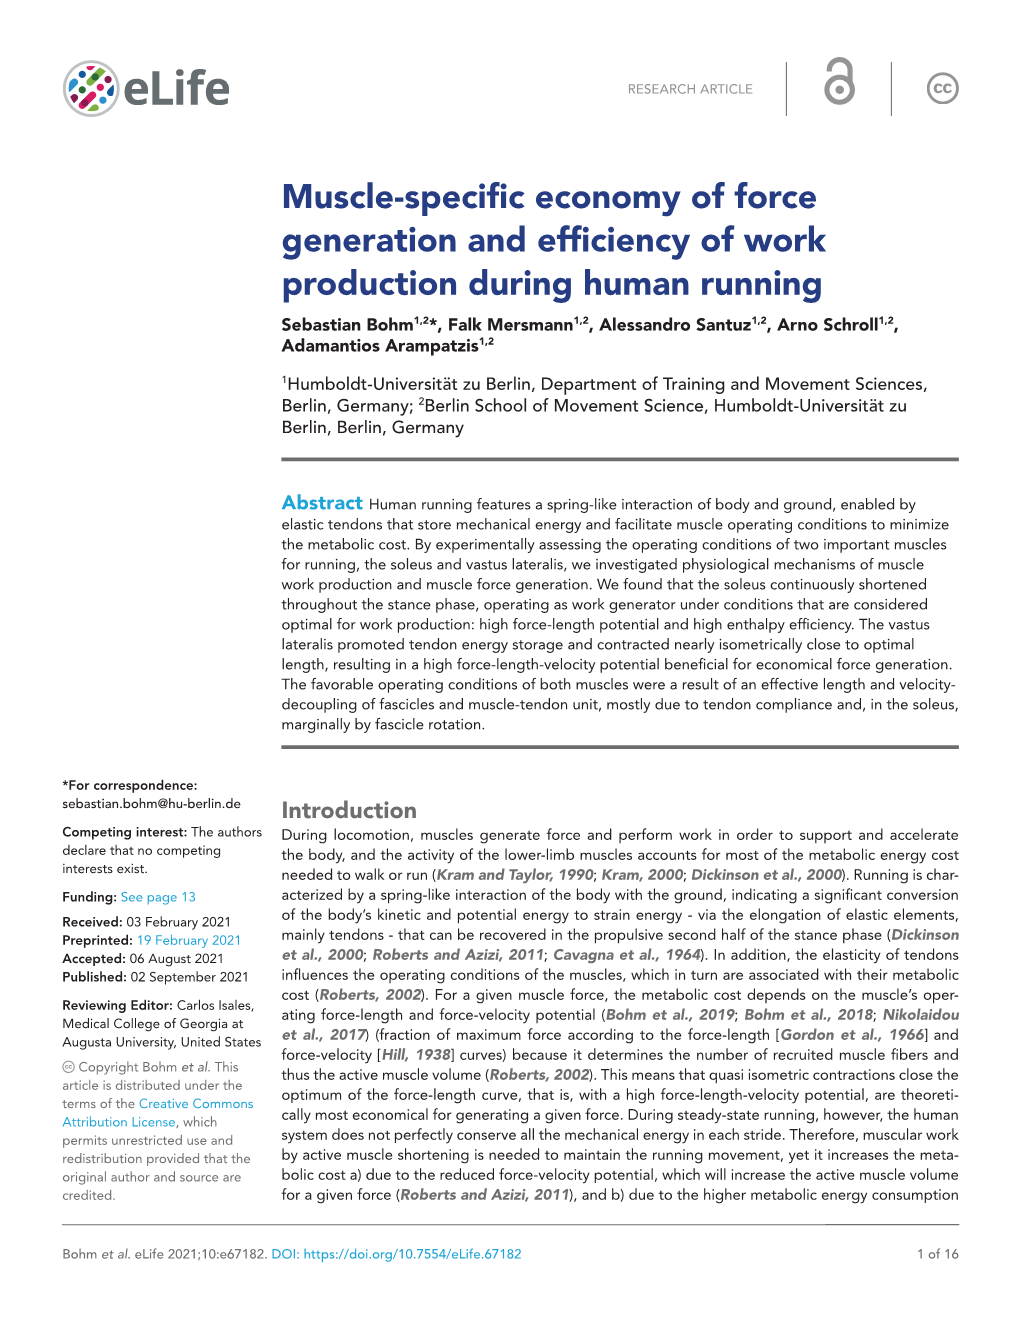 Muscle- Specific Economy of Force Generation and Efficiency of Work